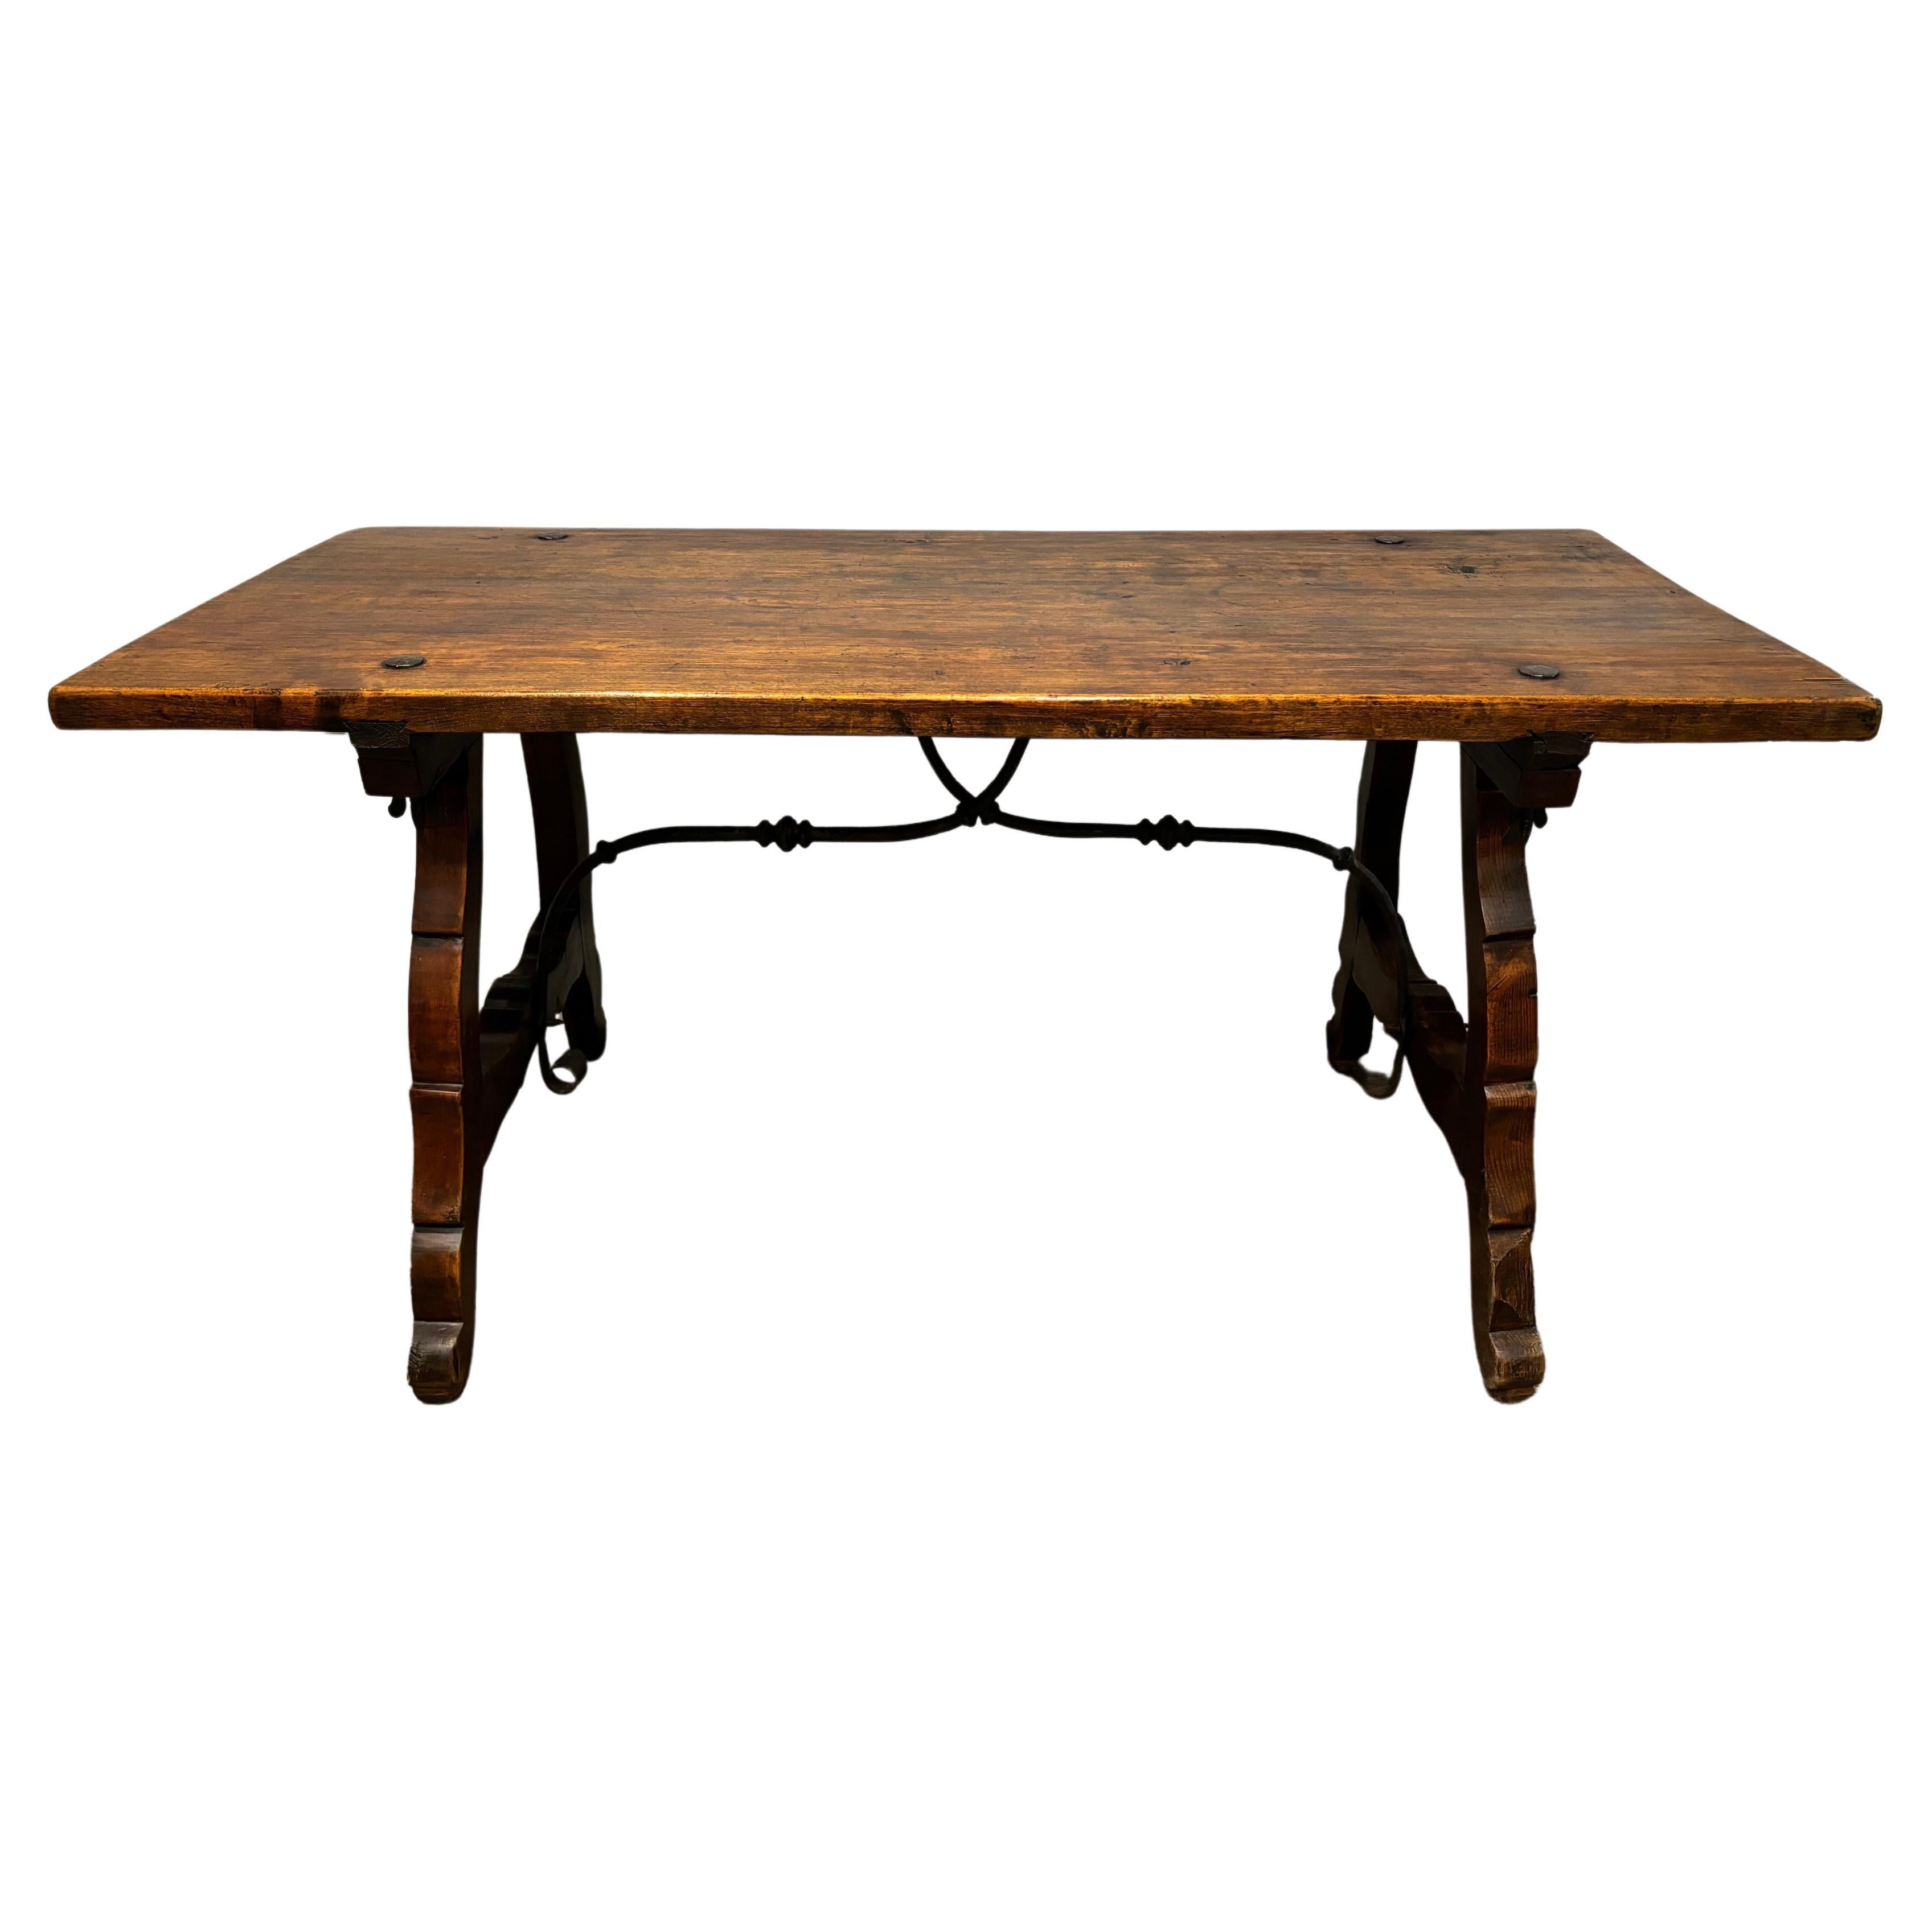 This wonderful table can be used as well as a desk. It has an amazing work of wrought iron at the base and the top.